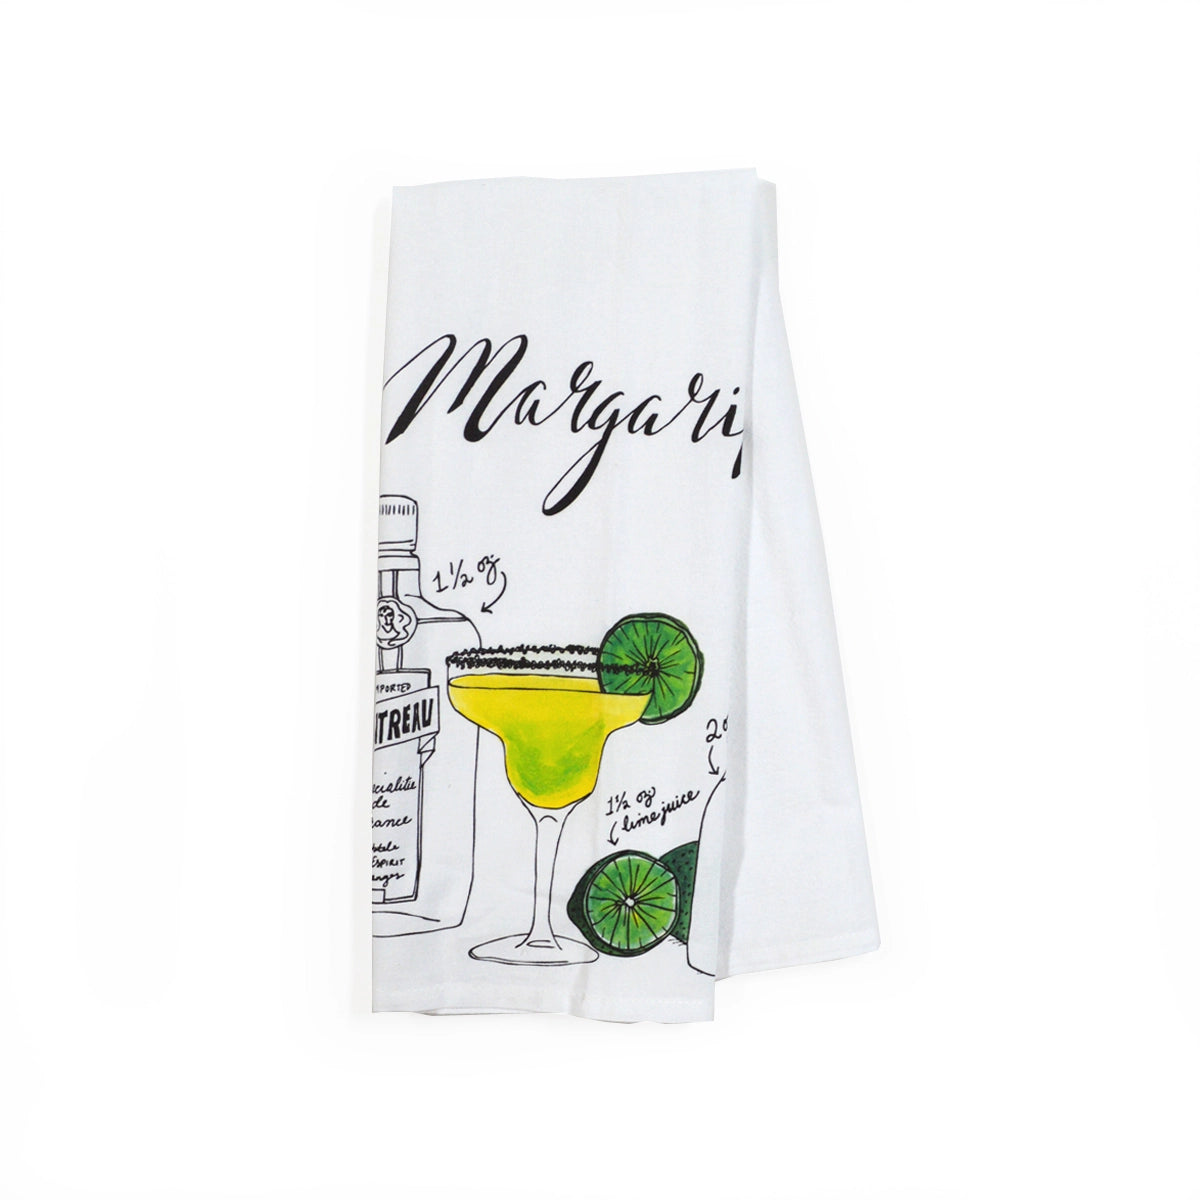 Margarita cocktail tea towel folded in half. Design features tequila bottle and lime flavored margarita  illustration. 